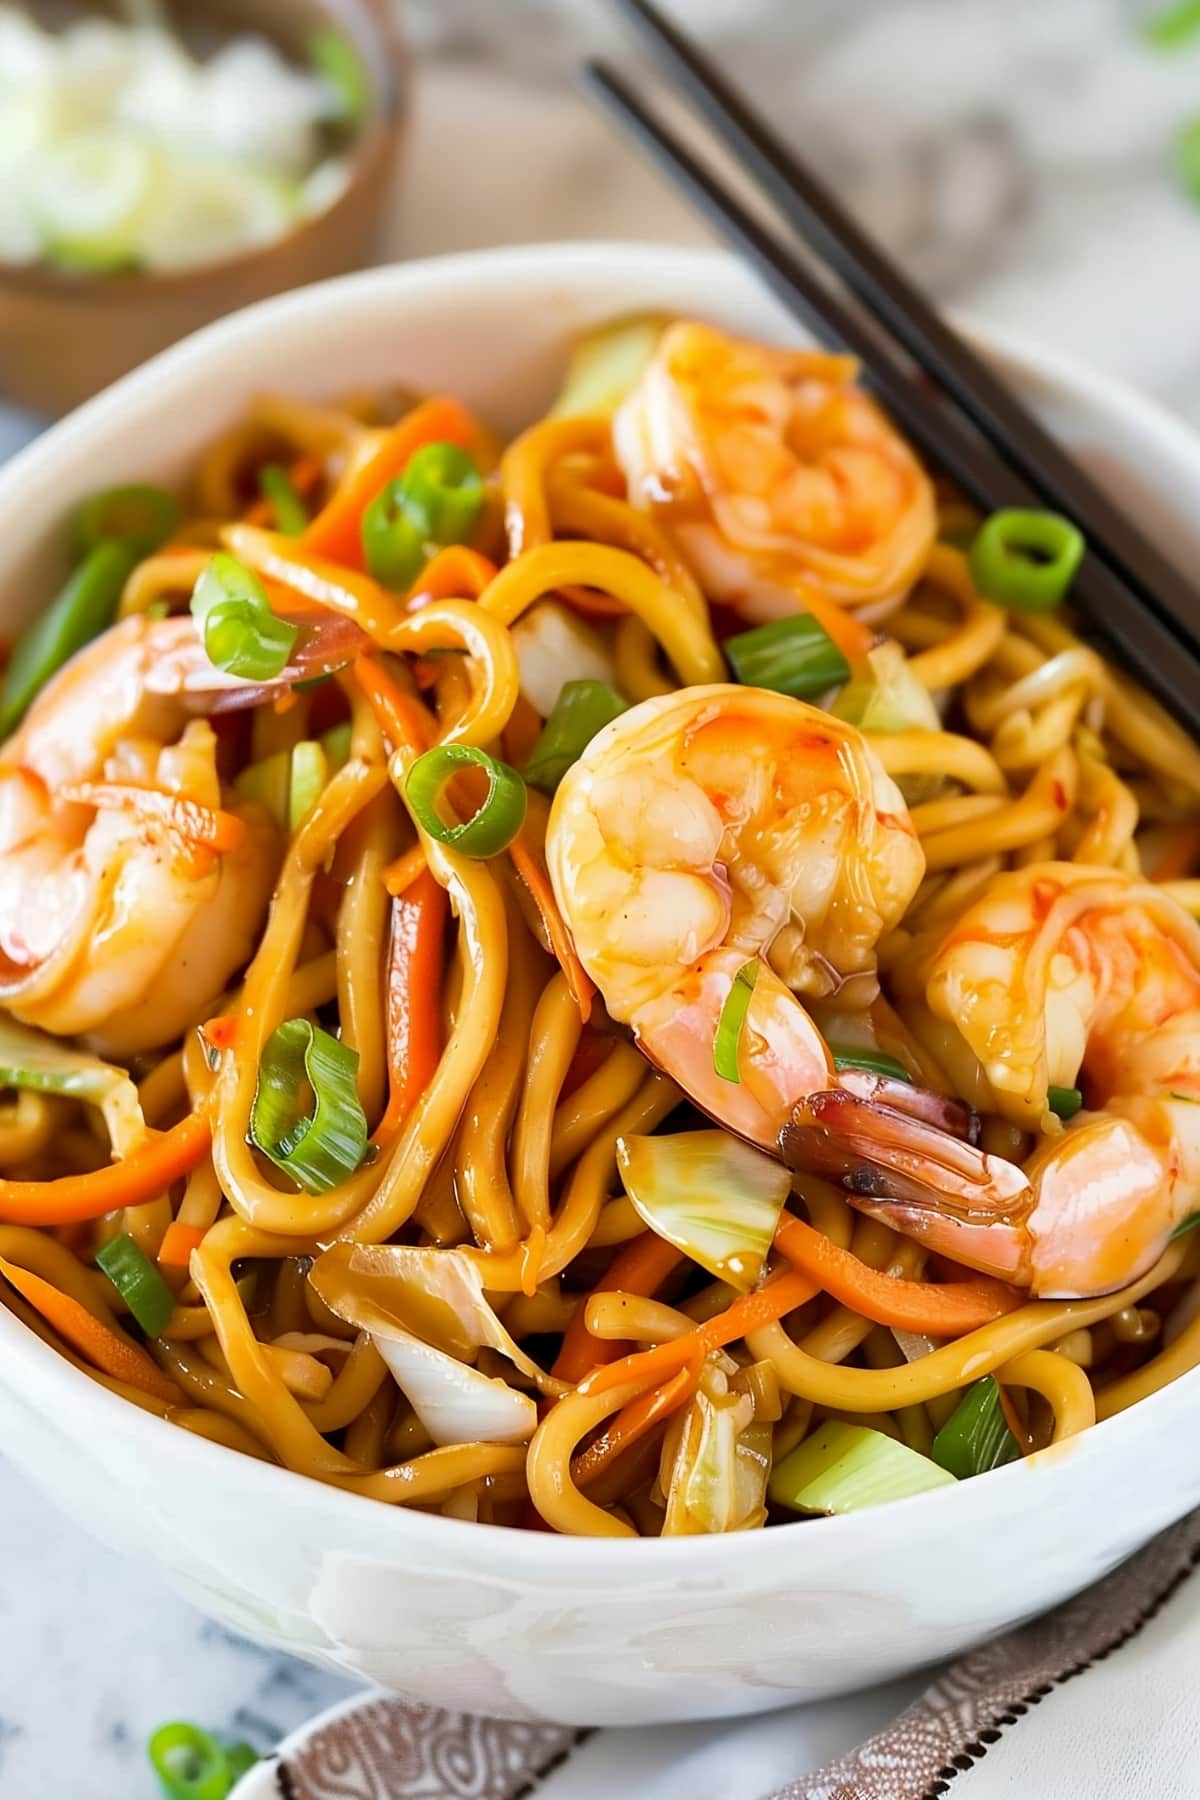 Shrimp lo mein noodles in a bowl with vegetables